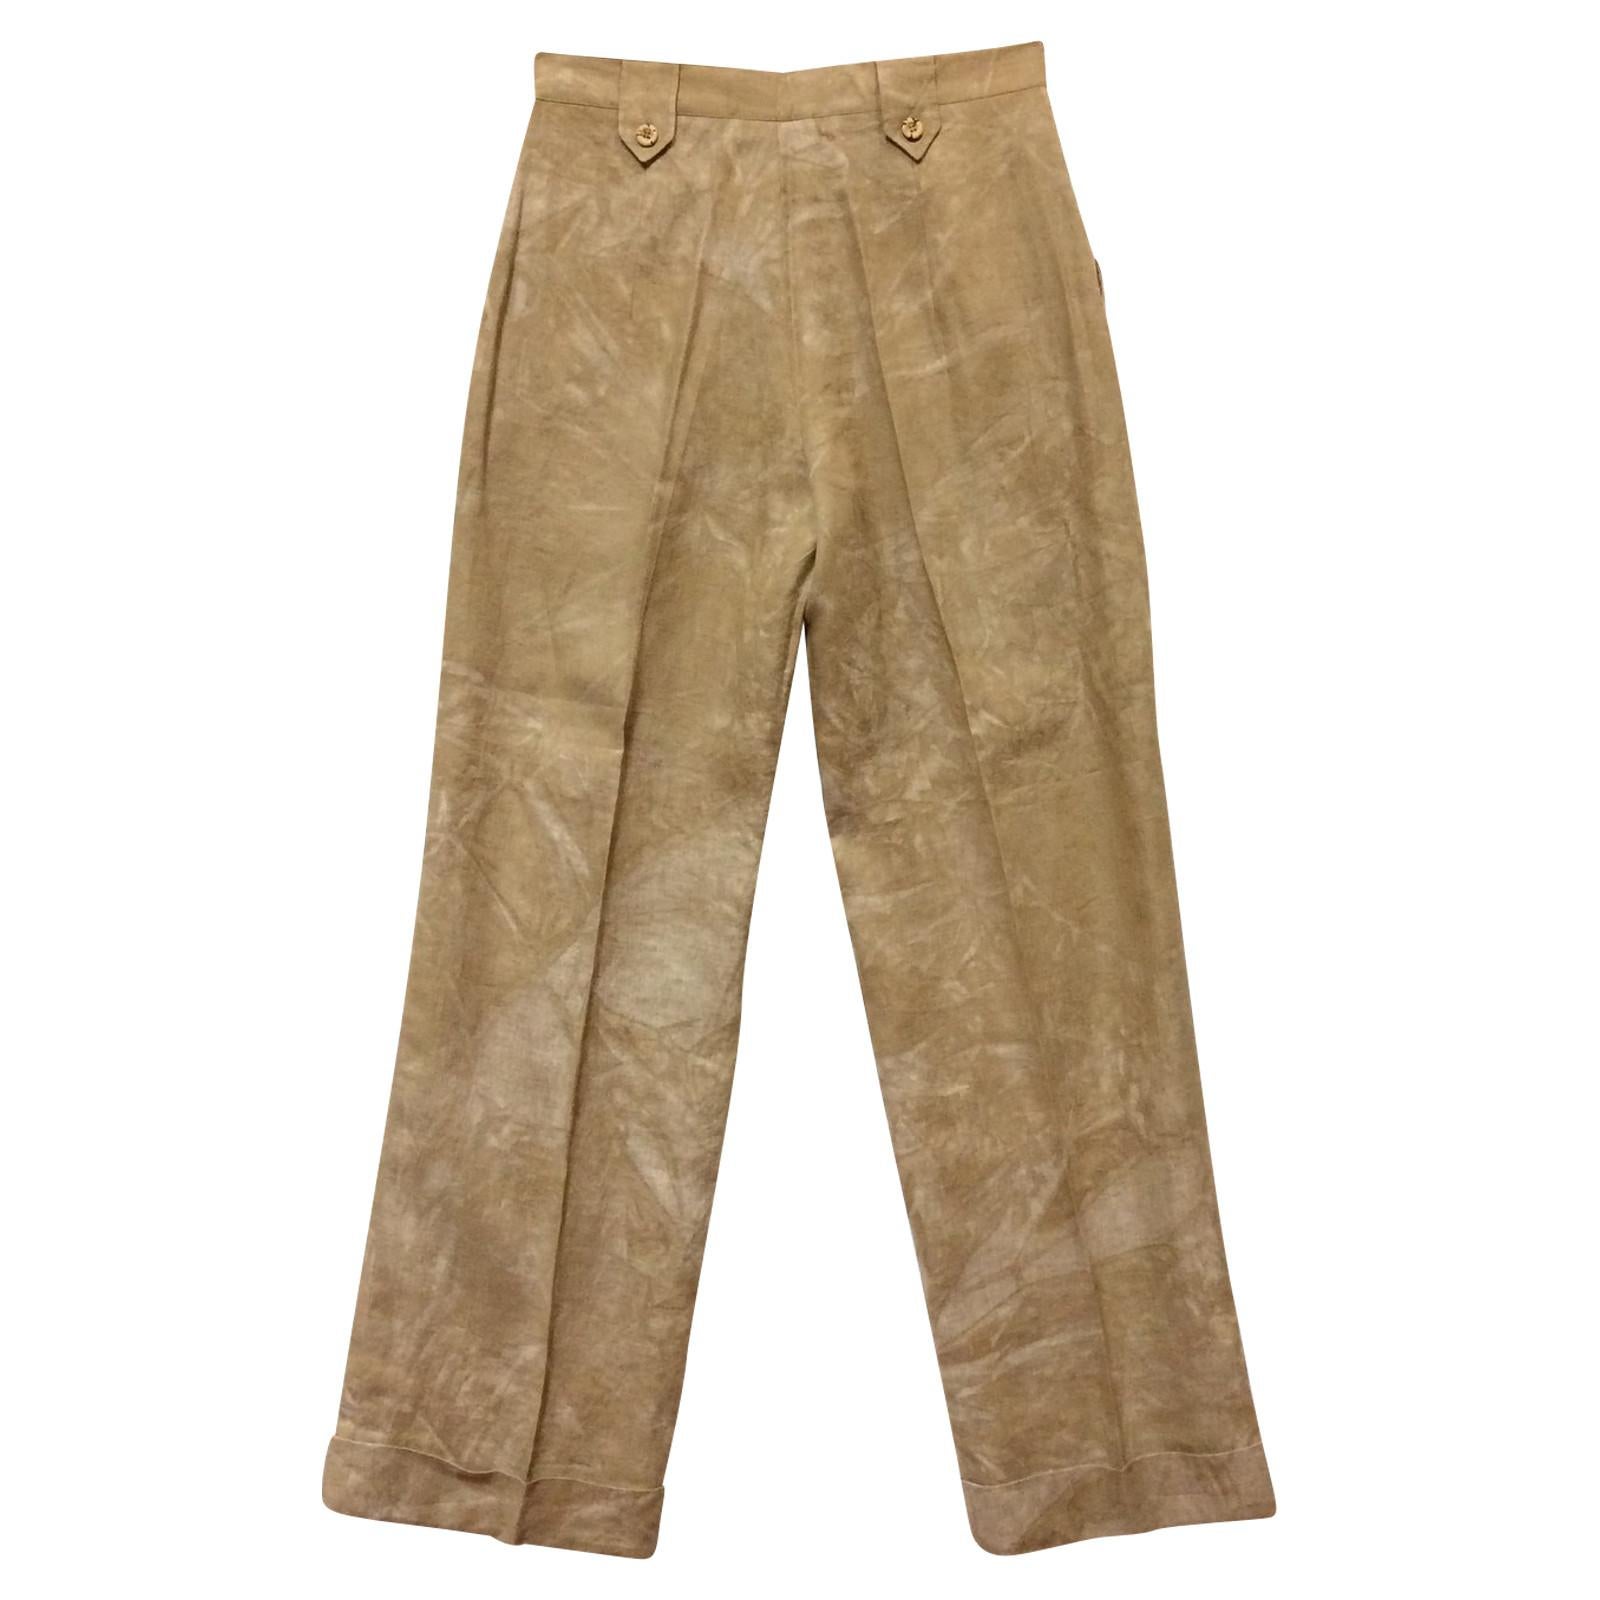 Gai Mattiolo beige linen trousers treated with tie dye technique. High waist, front zip and button closure. Welt pockets, pleats at the waist and turn-up at the bottom.

Years: 90s

Made in Italy

Size: 50 IT

Flat measurements
Lenght: 116 cm
Waist: